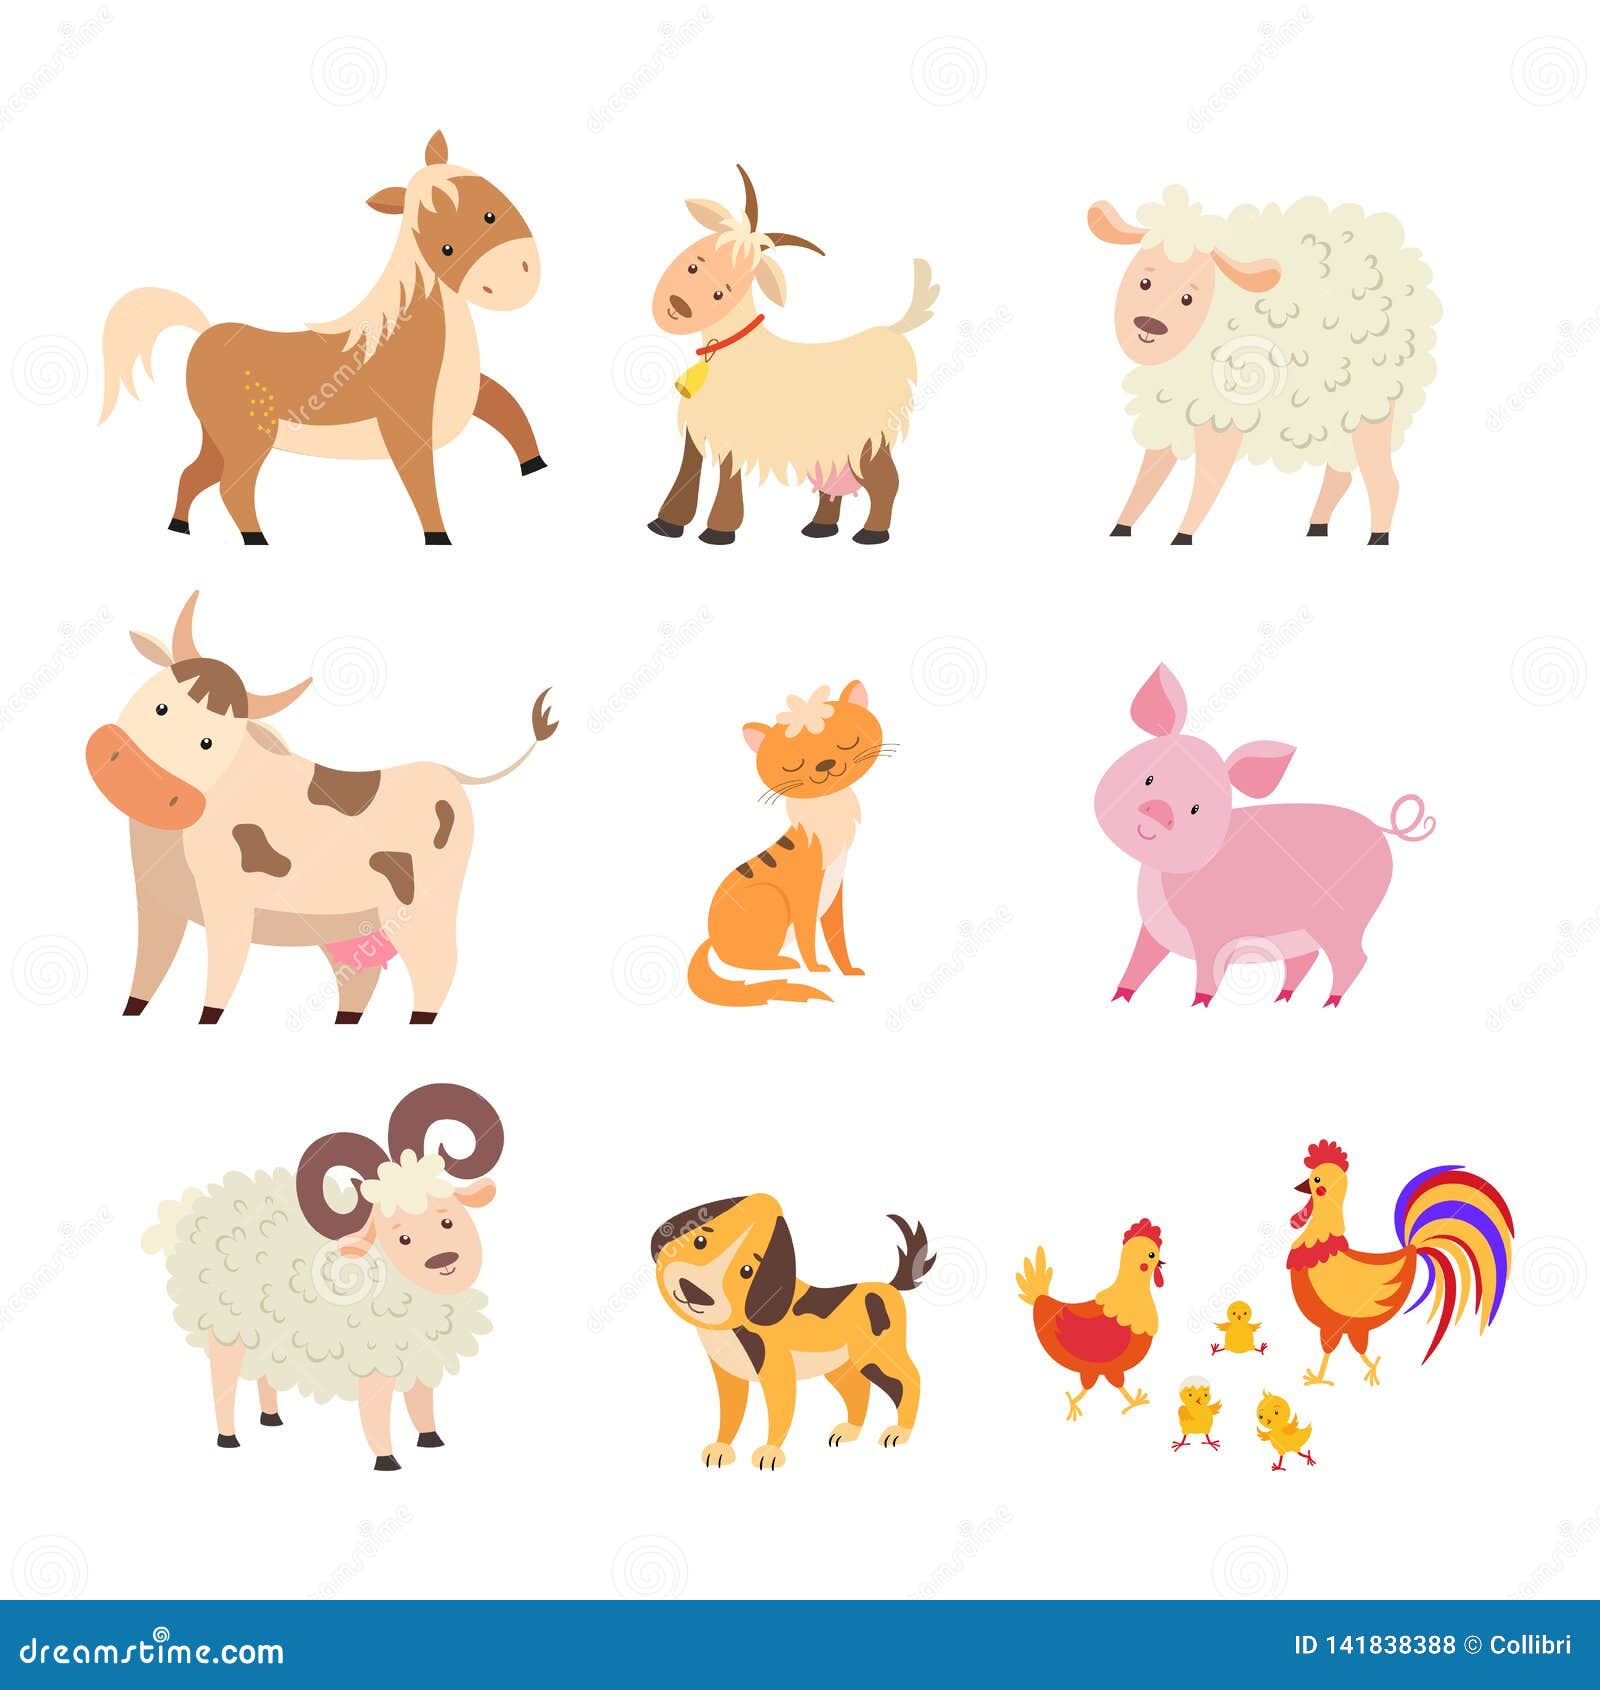 Different Home Farm Animals Set: Horse, Cow, Sheep, Goat, Cat, Dog, Pig,  Hen, Rooster, Chicken, Ram. Stock Vector - Illustration of country, animal:  141838388